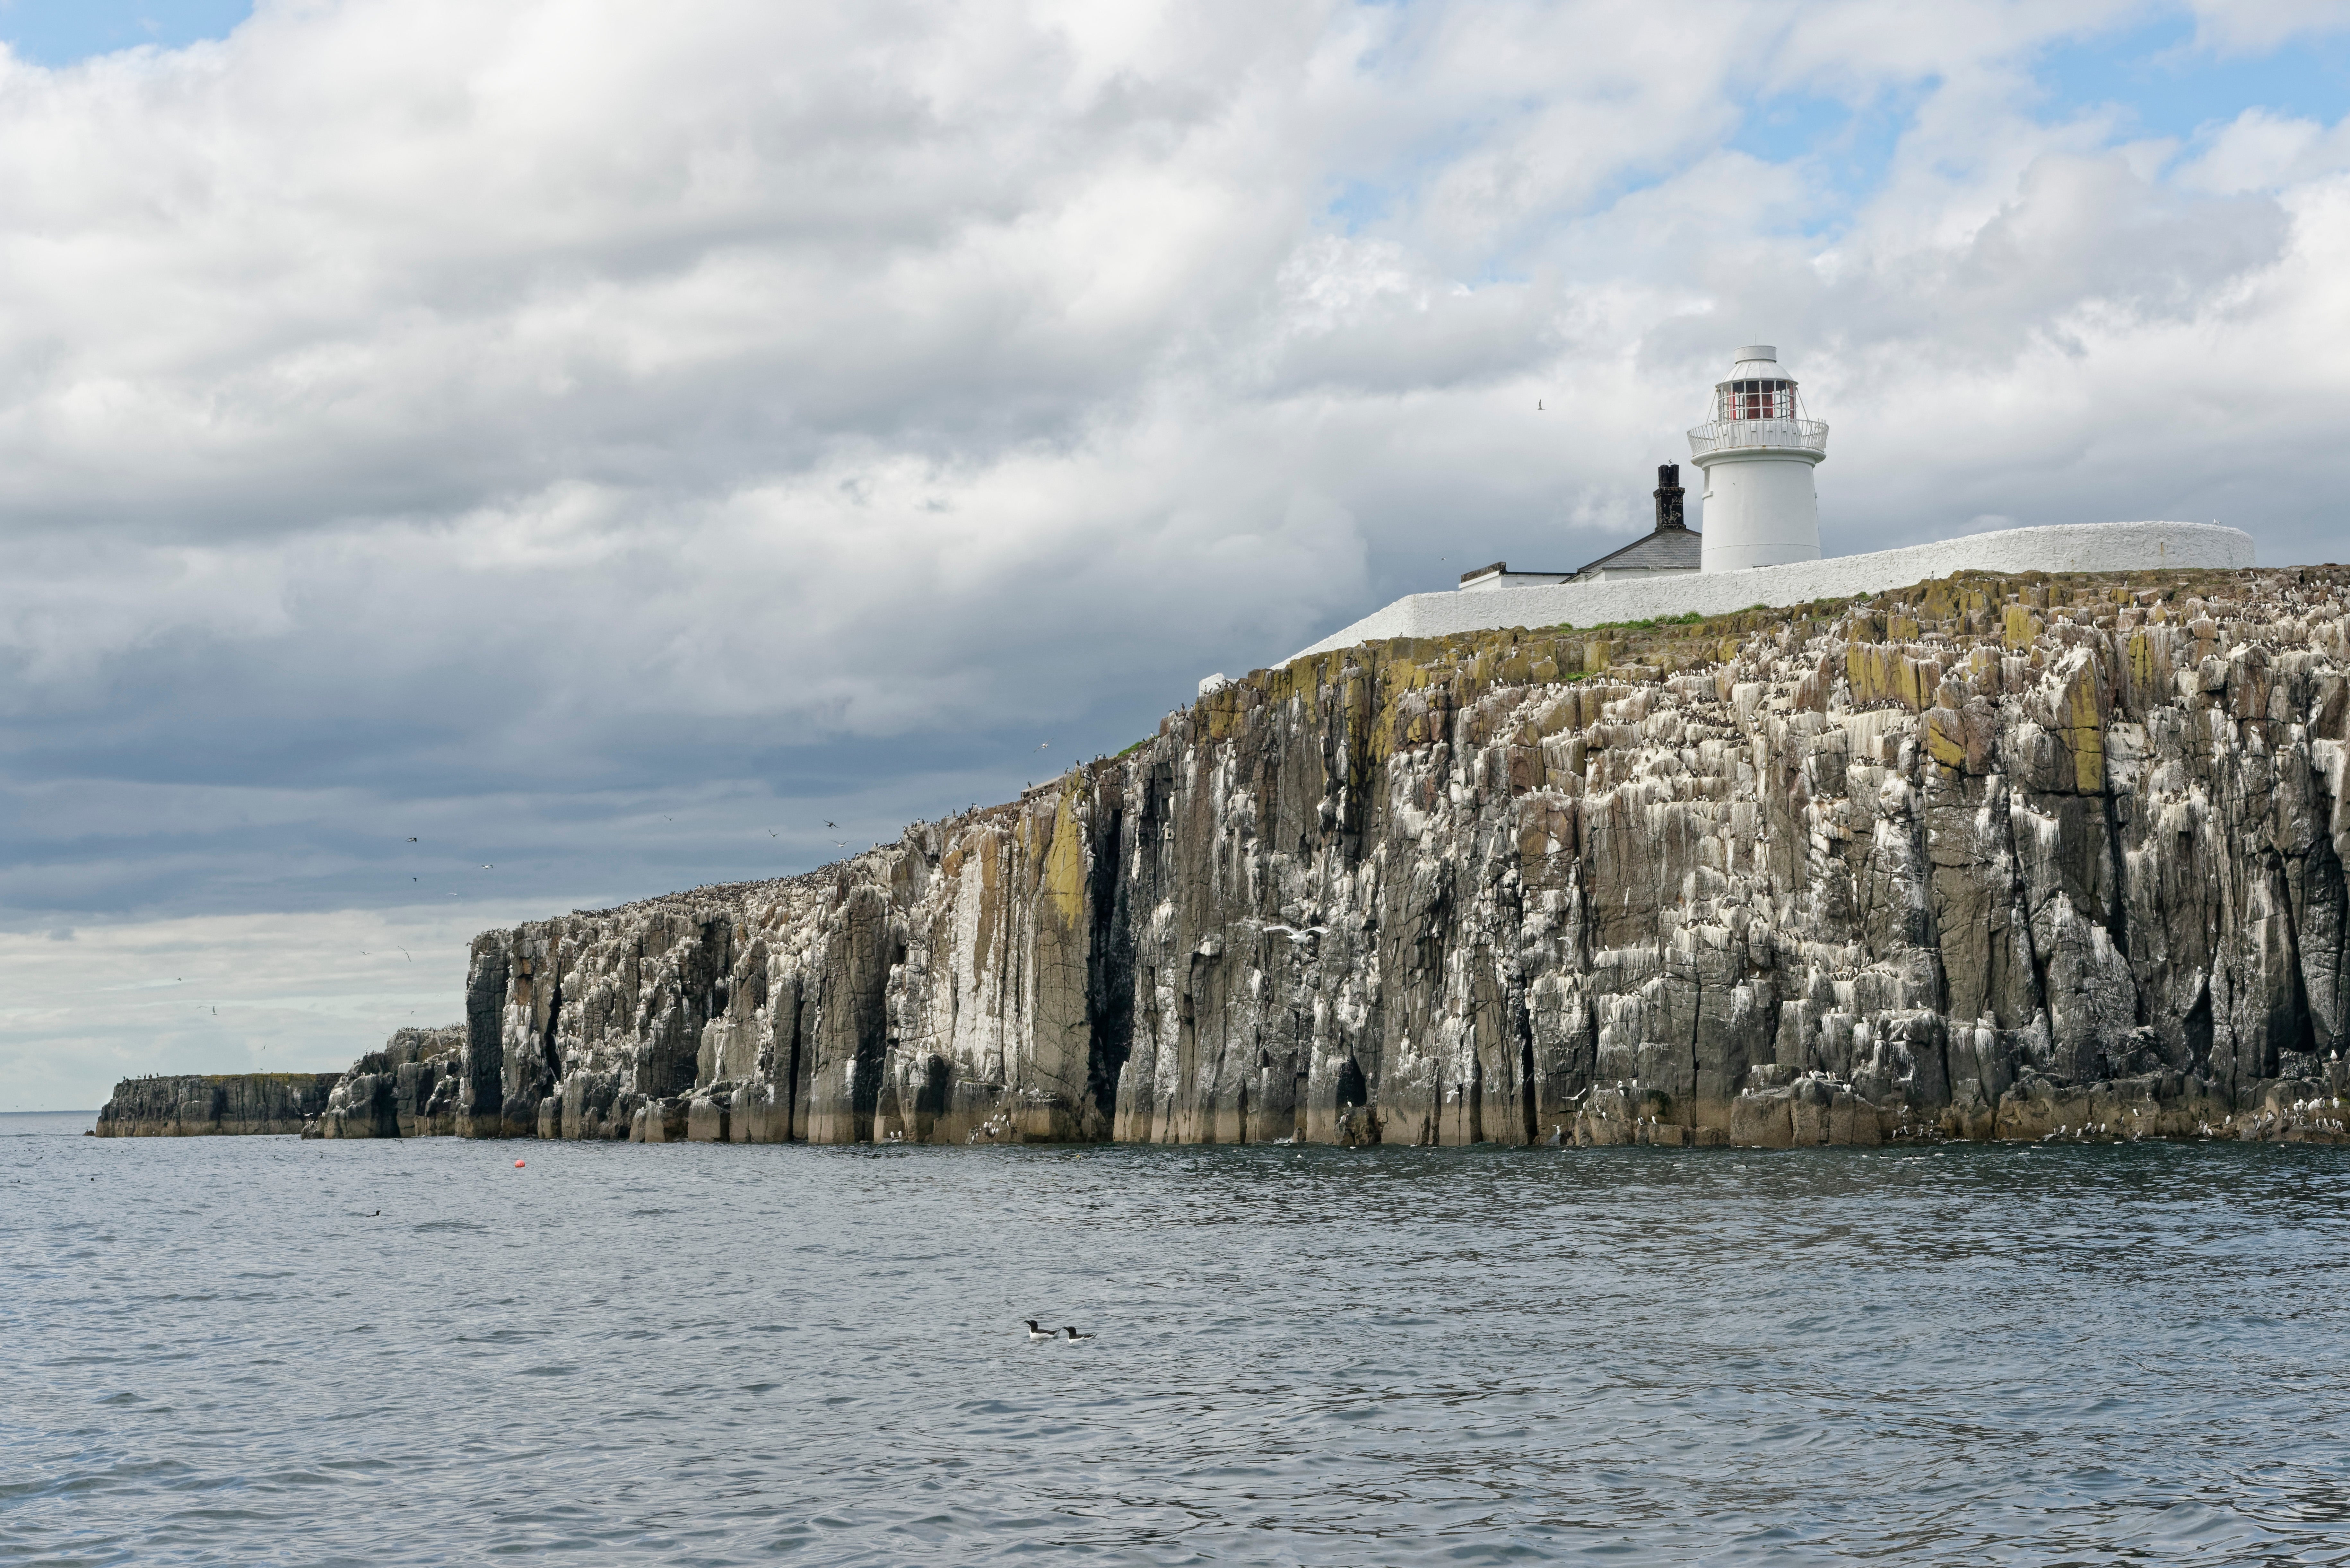 Farne Lighthouse is one of only a few buildings on Inner Farne, which will reopen to tourists in March